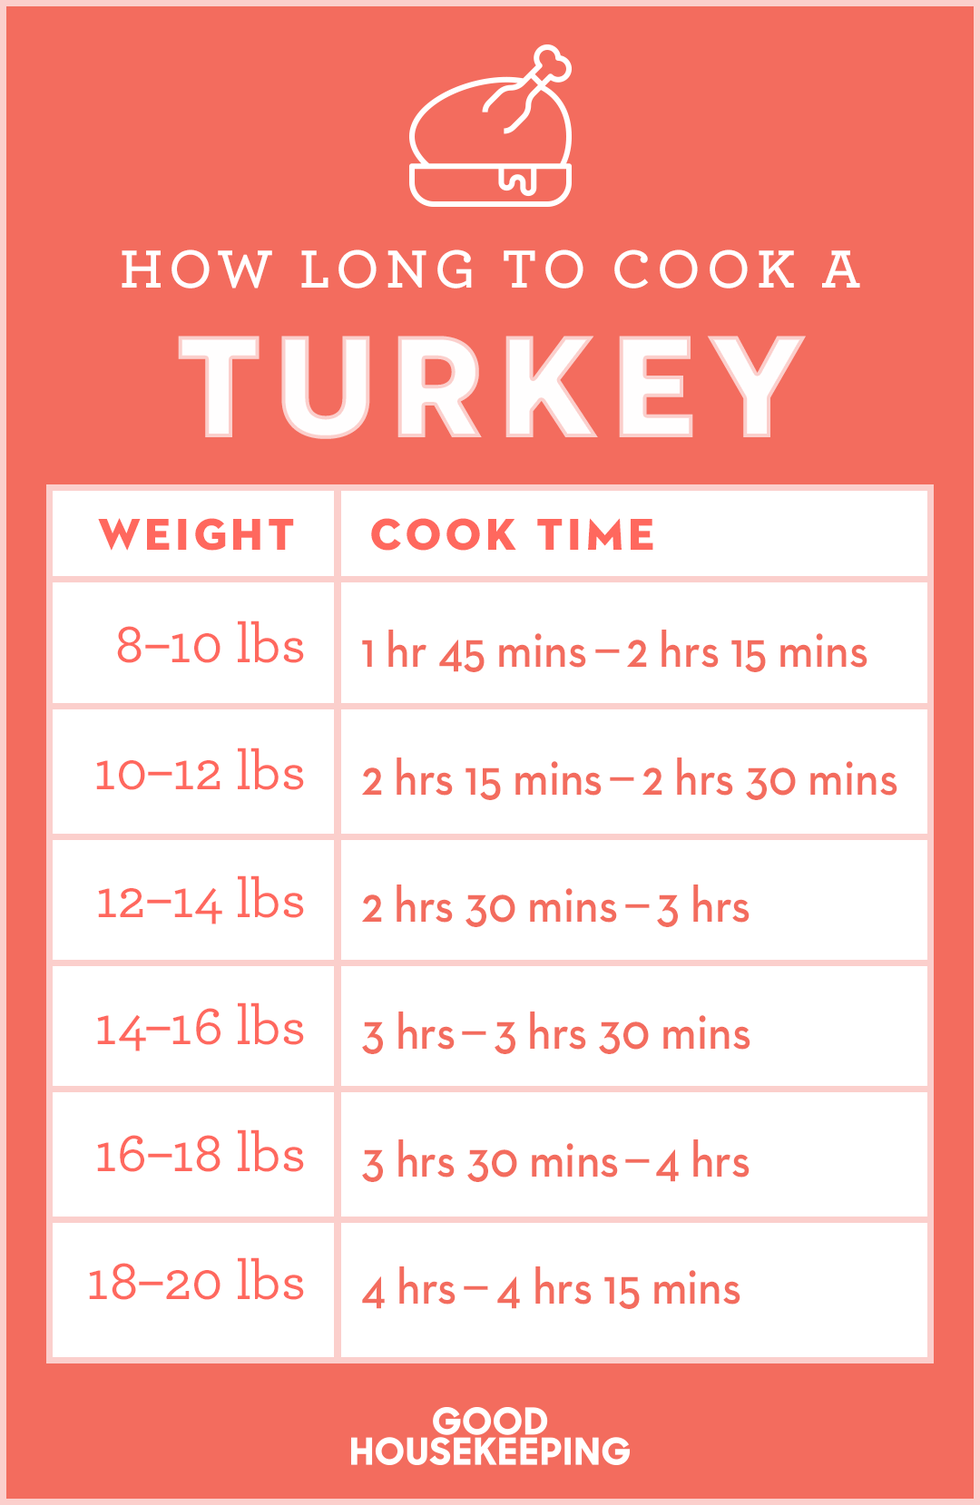 https://hips.hearstapps.com/hmg-prod/images/how-long-to-cook-a-turkey-1602020755.png?resize=980:*